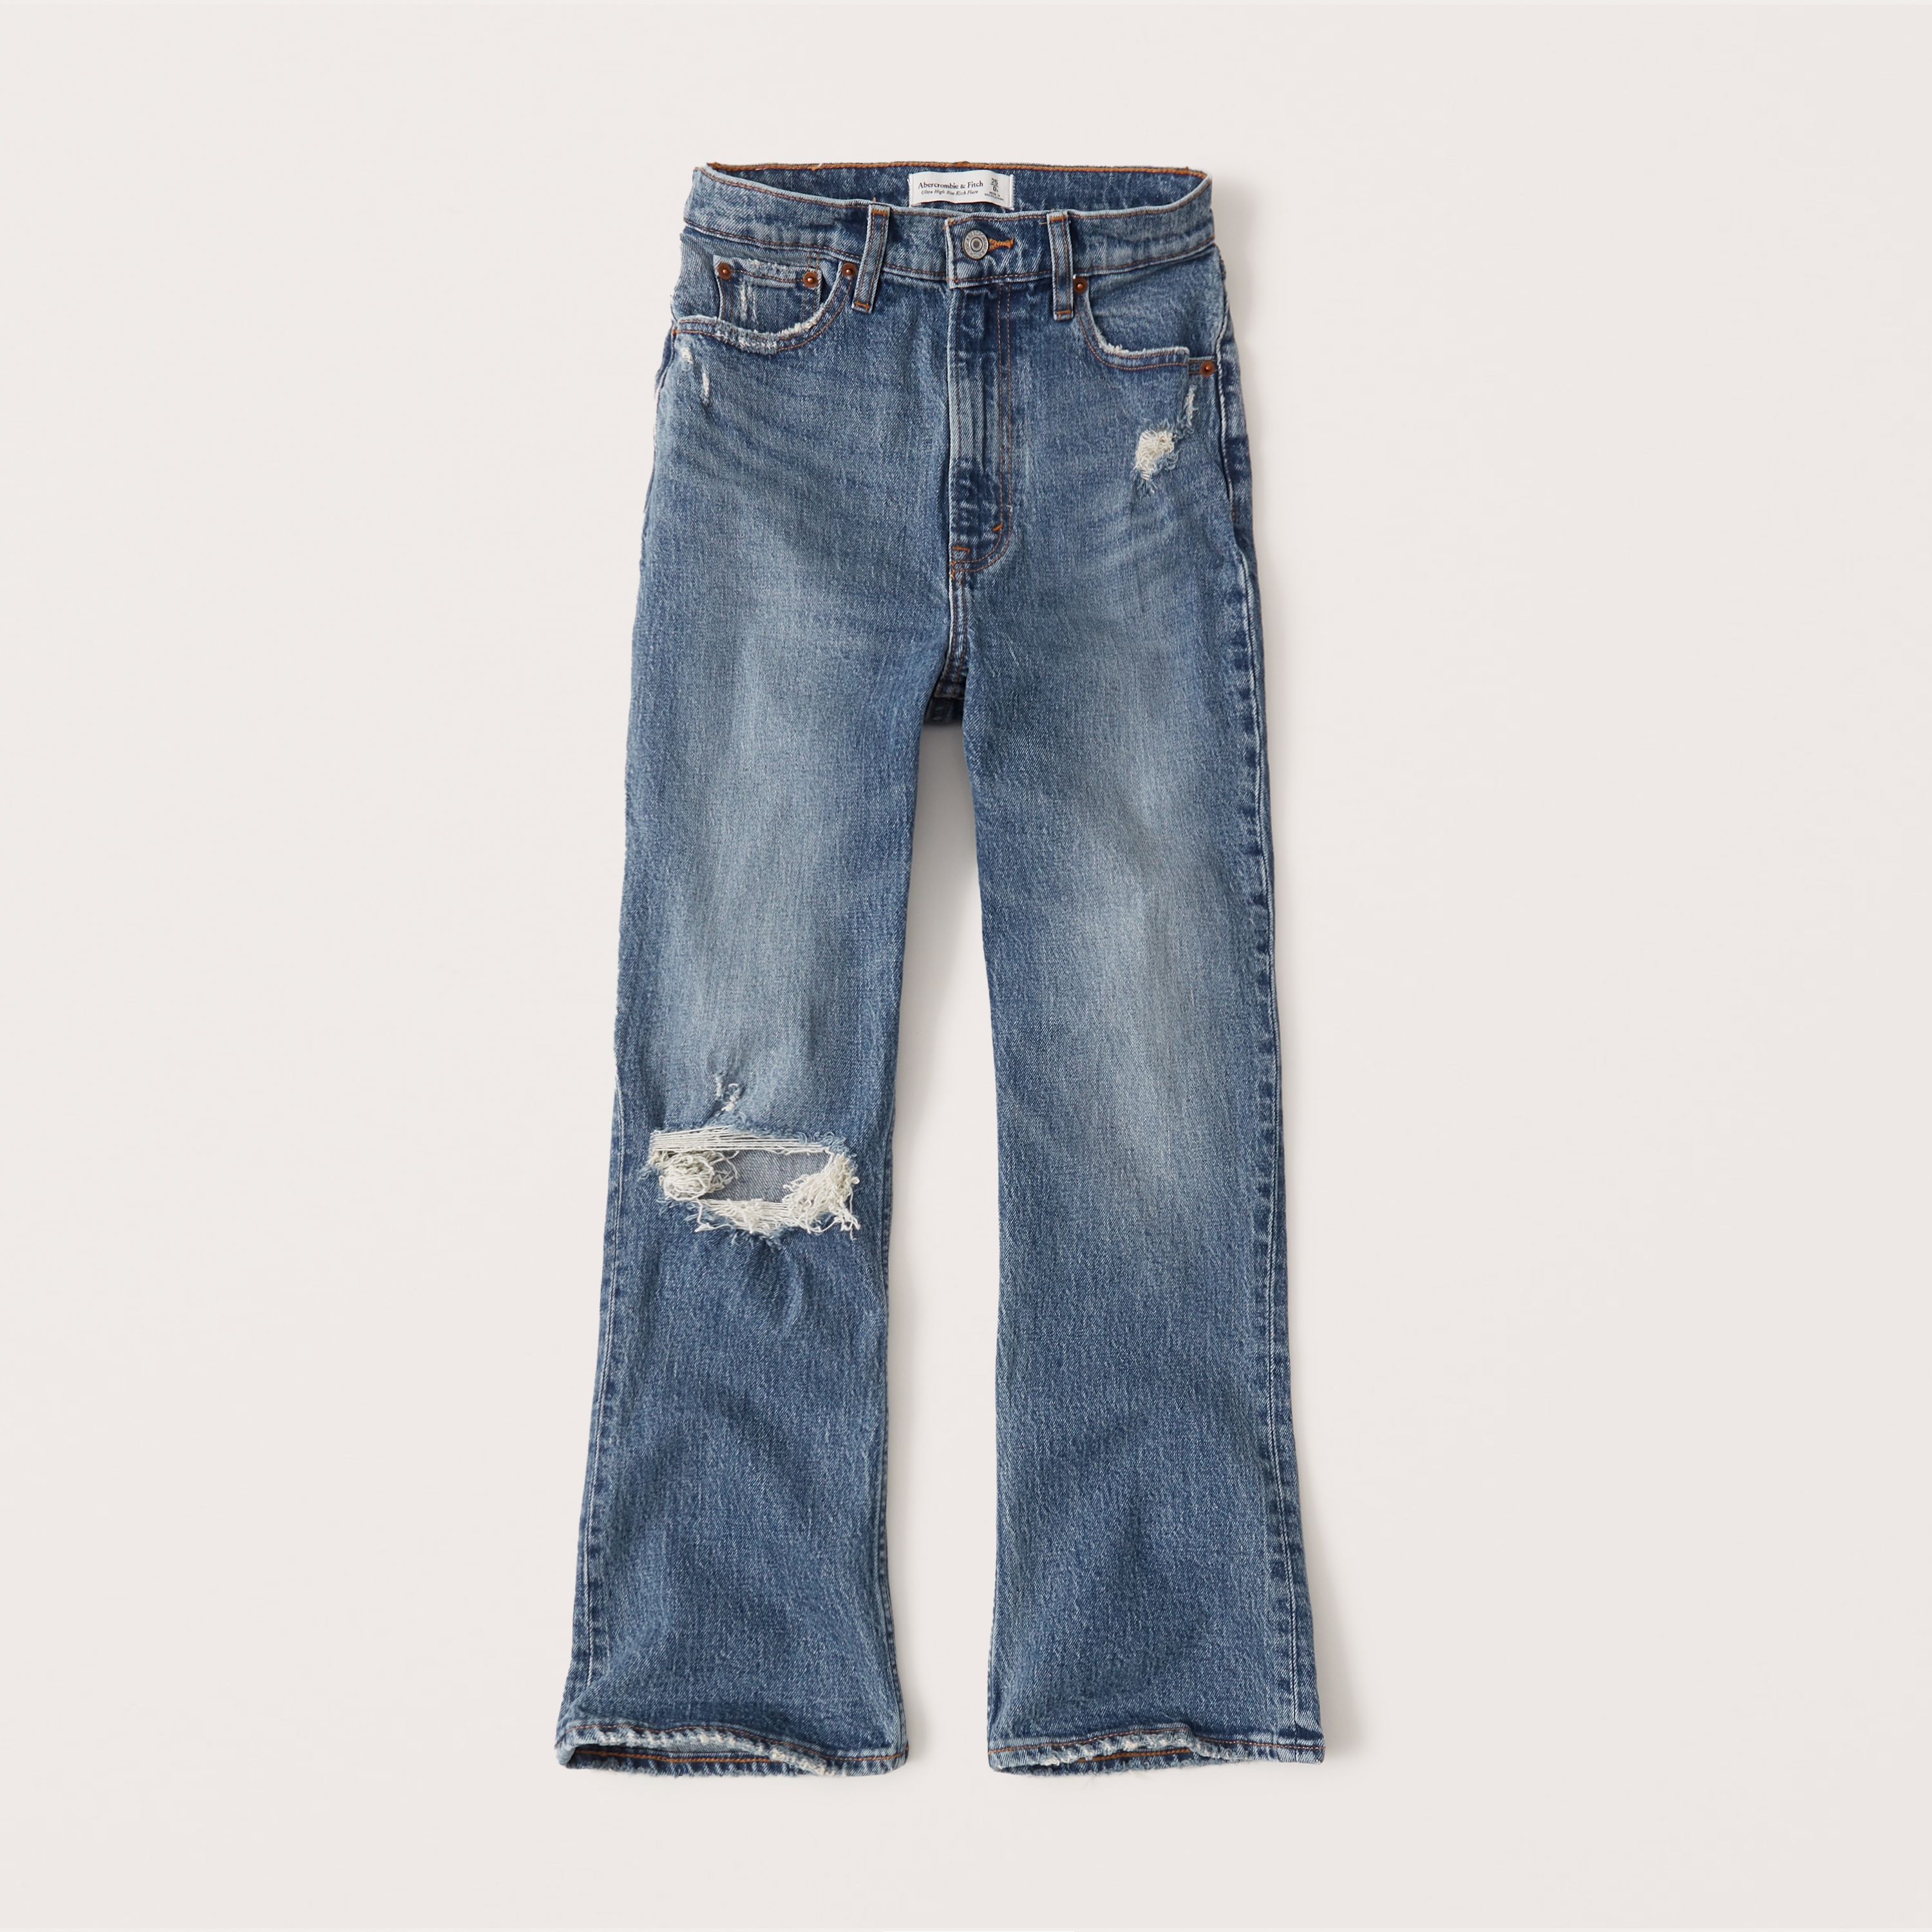 abercrombie and fitch flare jeans